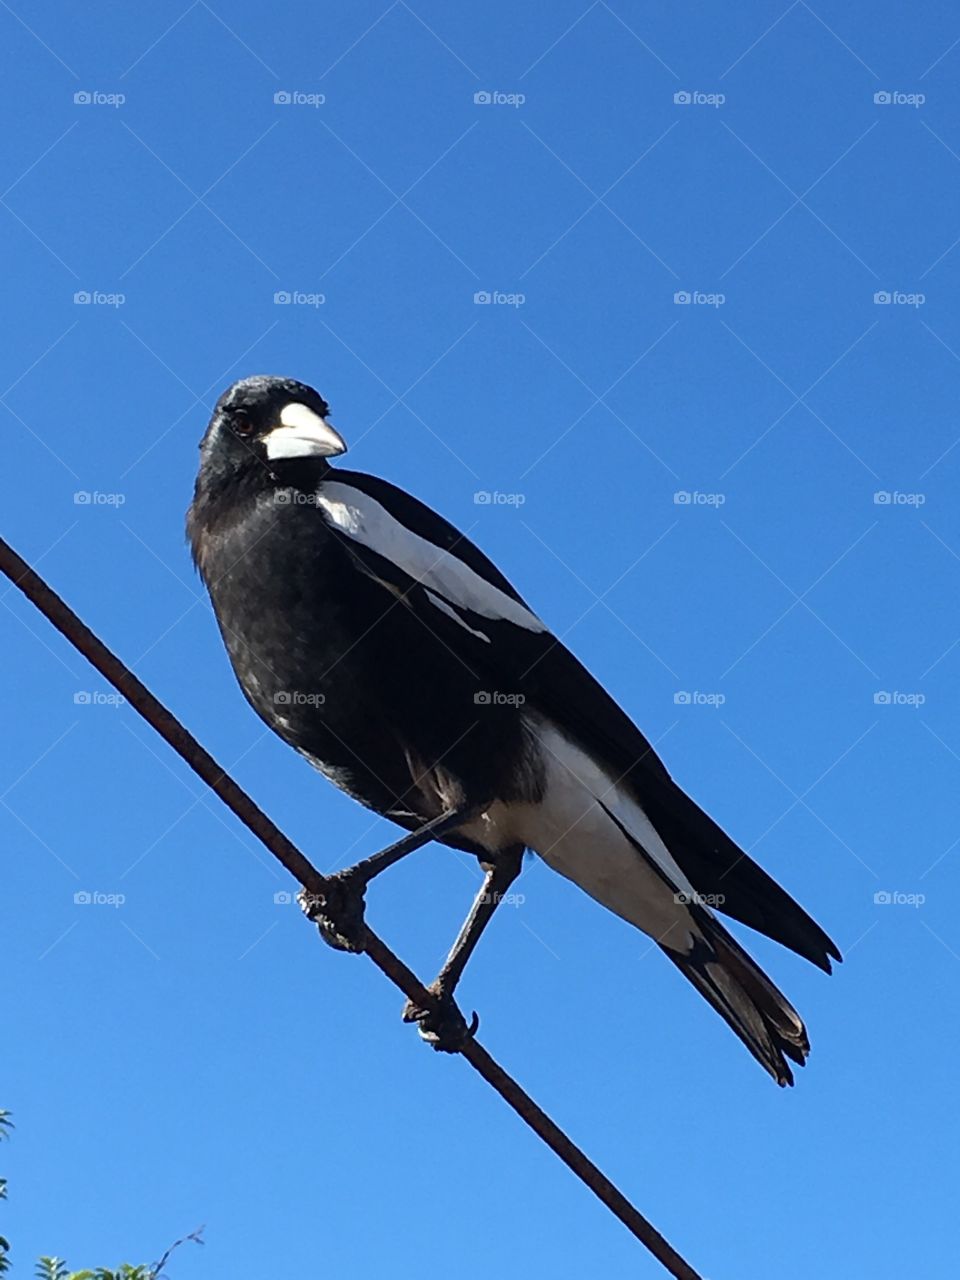 Closeup large wild magpie bird perched standing on a wire on a clear vivid blue day